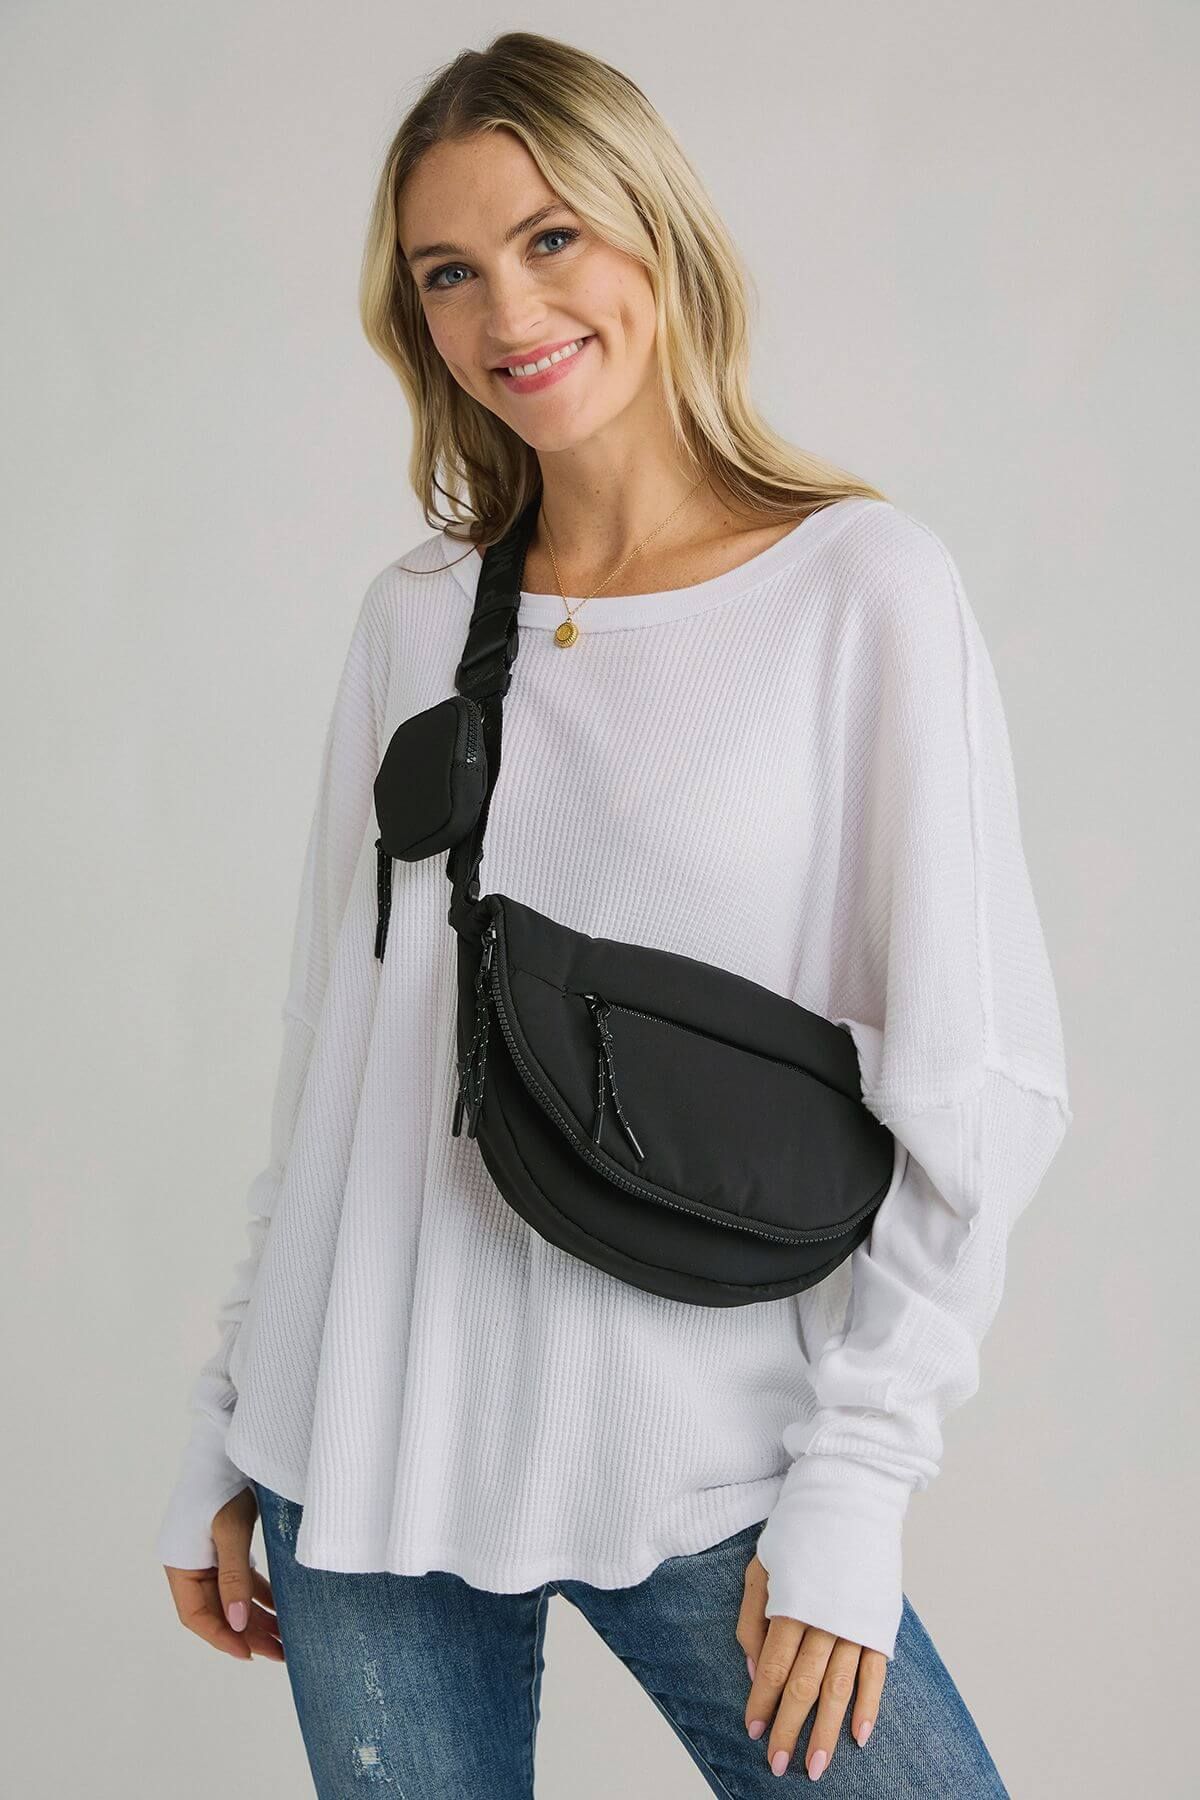 Free People Hit The Trails Sling | Social Threads